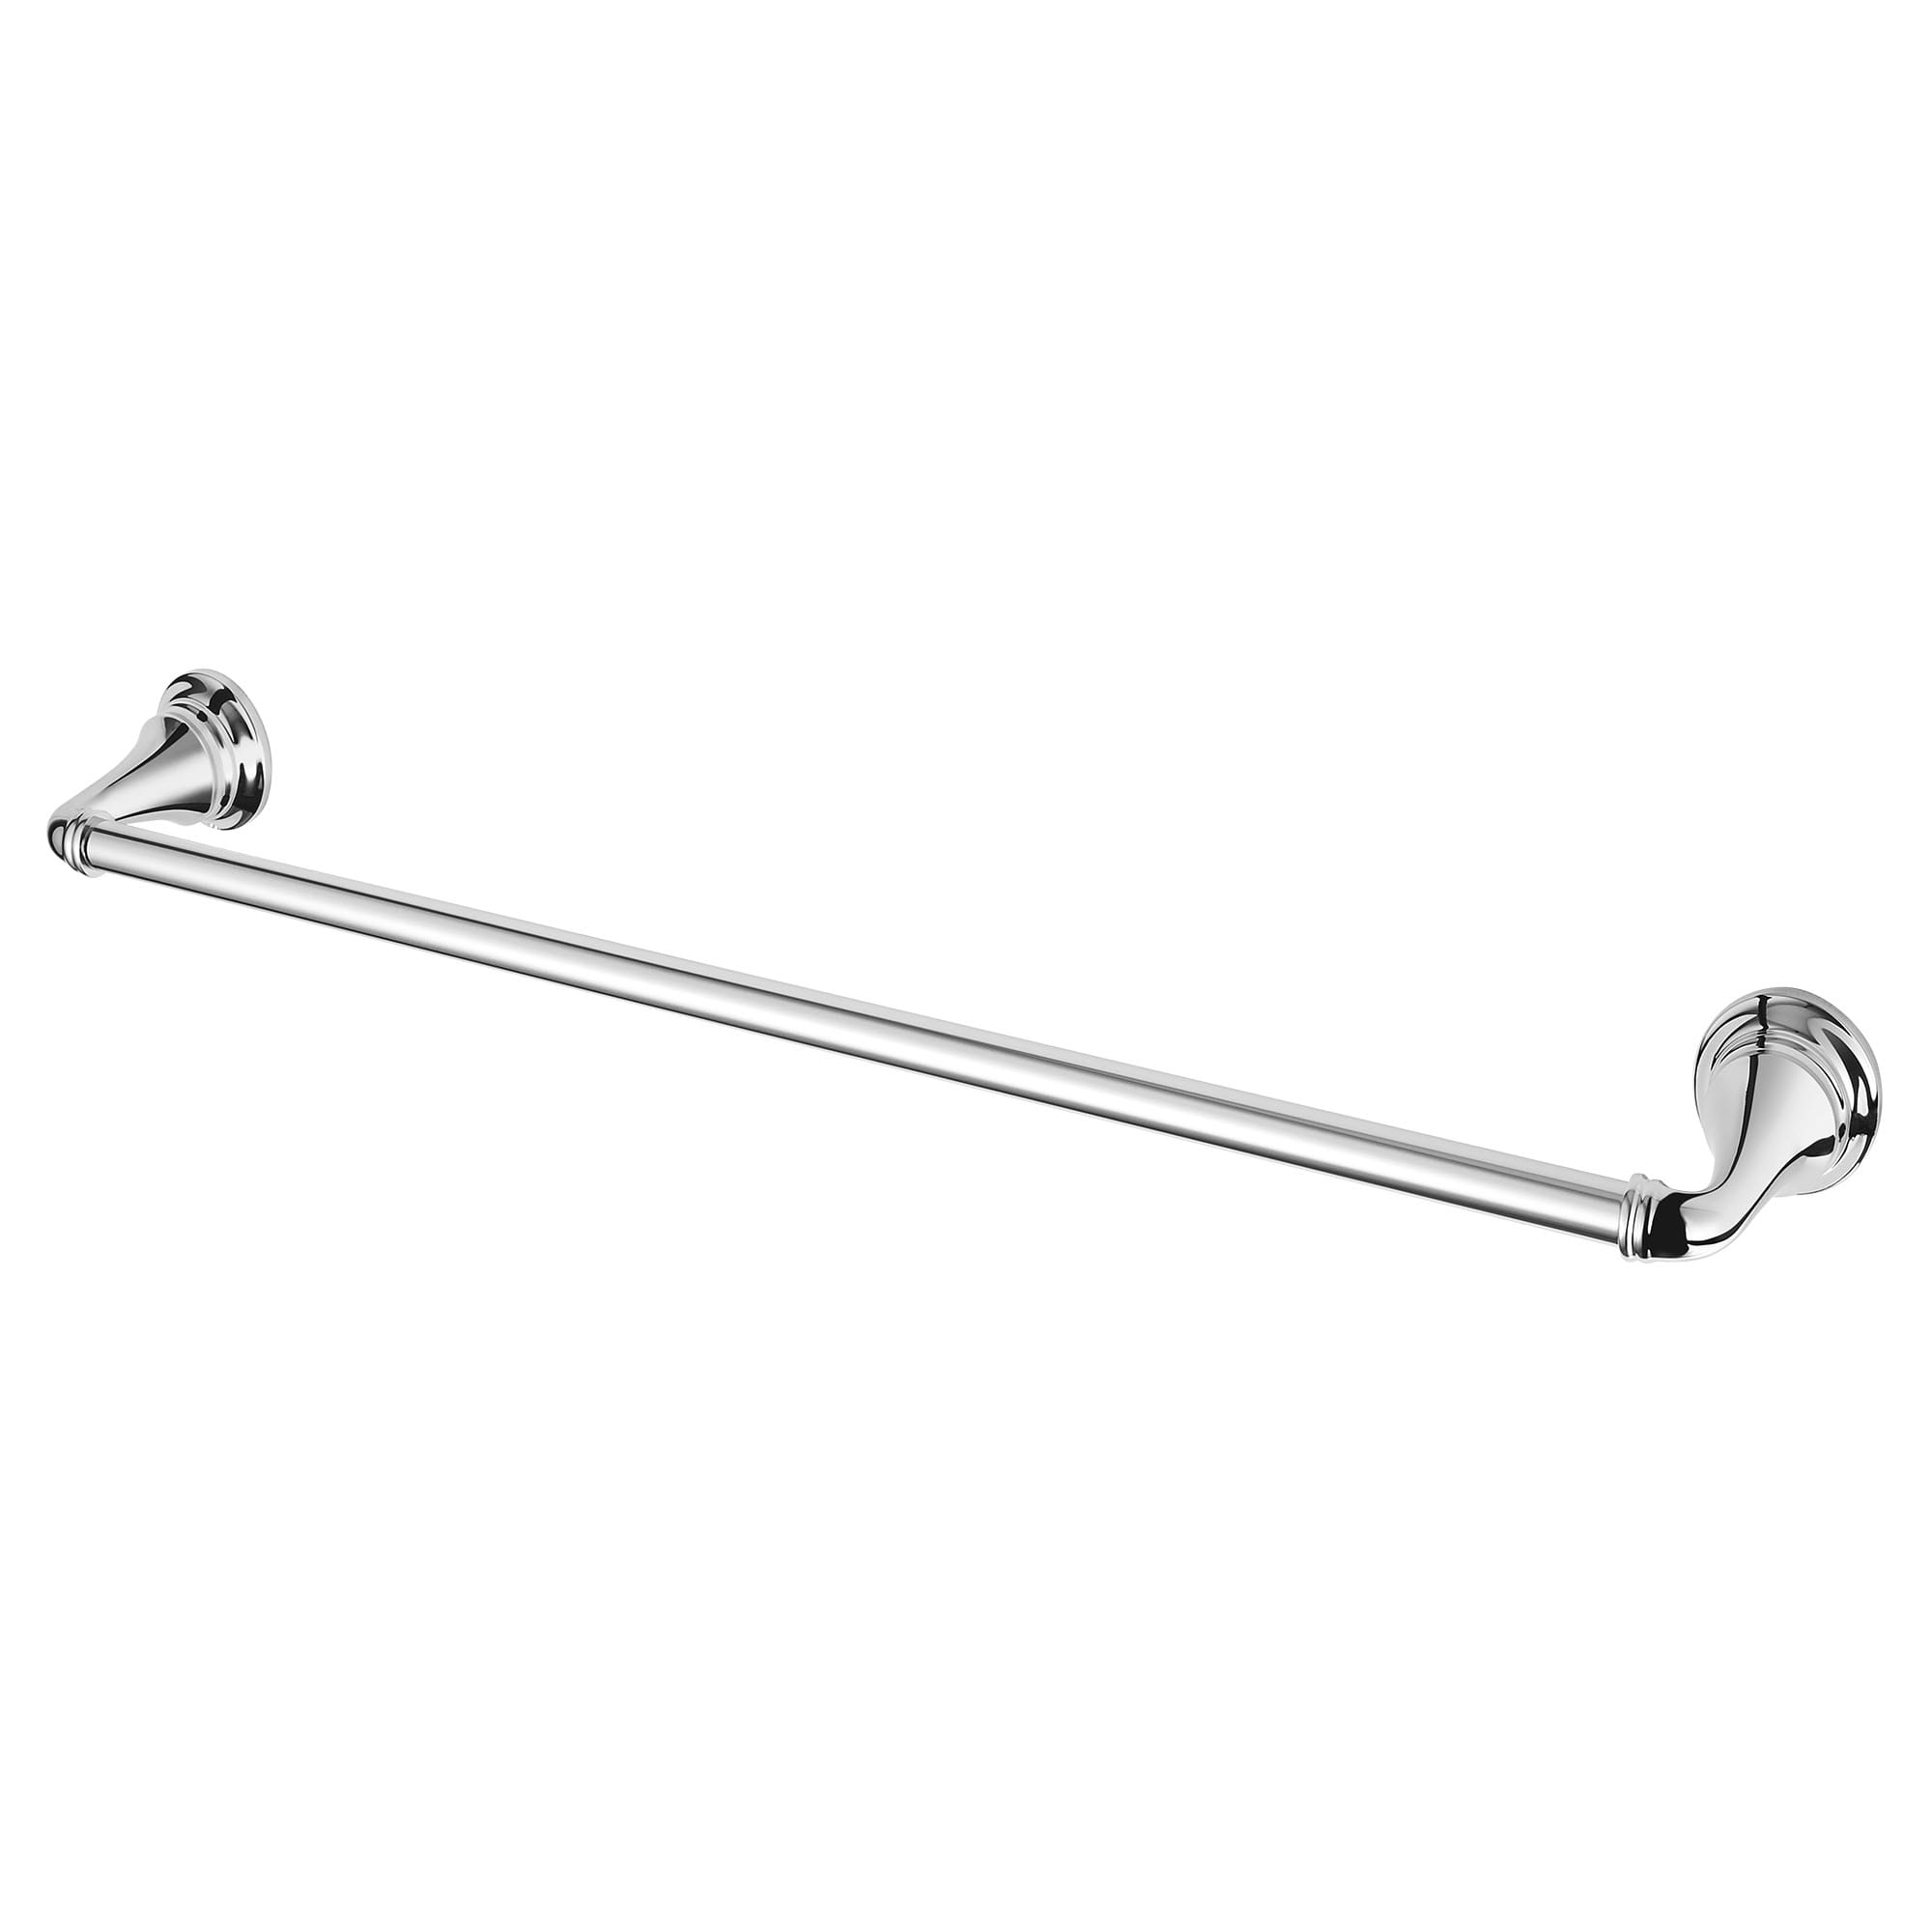 Polished Chrome Atlas Homewares LGTB18-CH Legacy Collection 18-In Towel Bar 